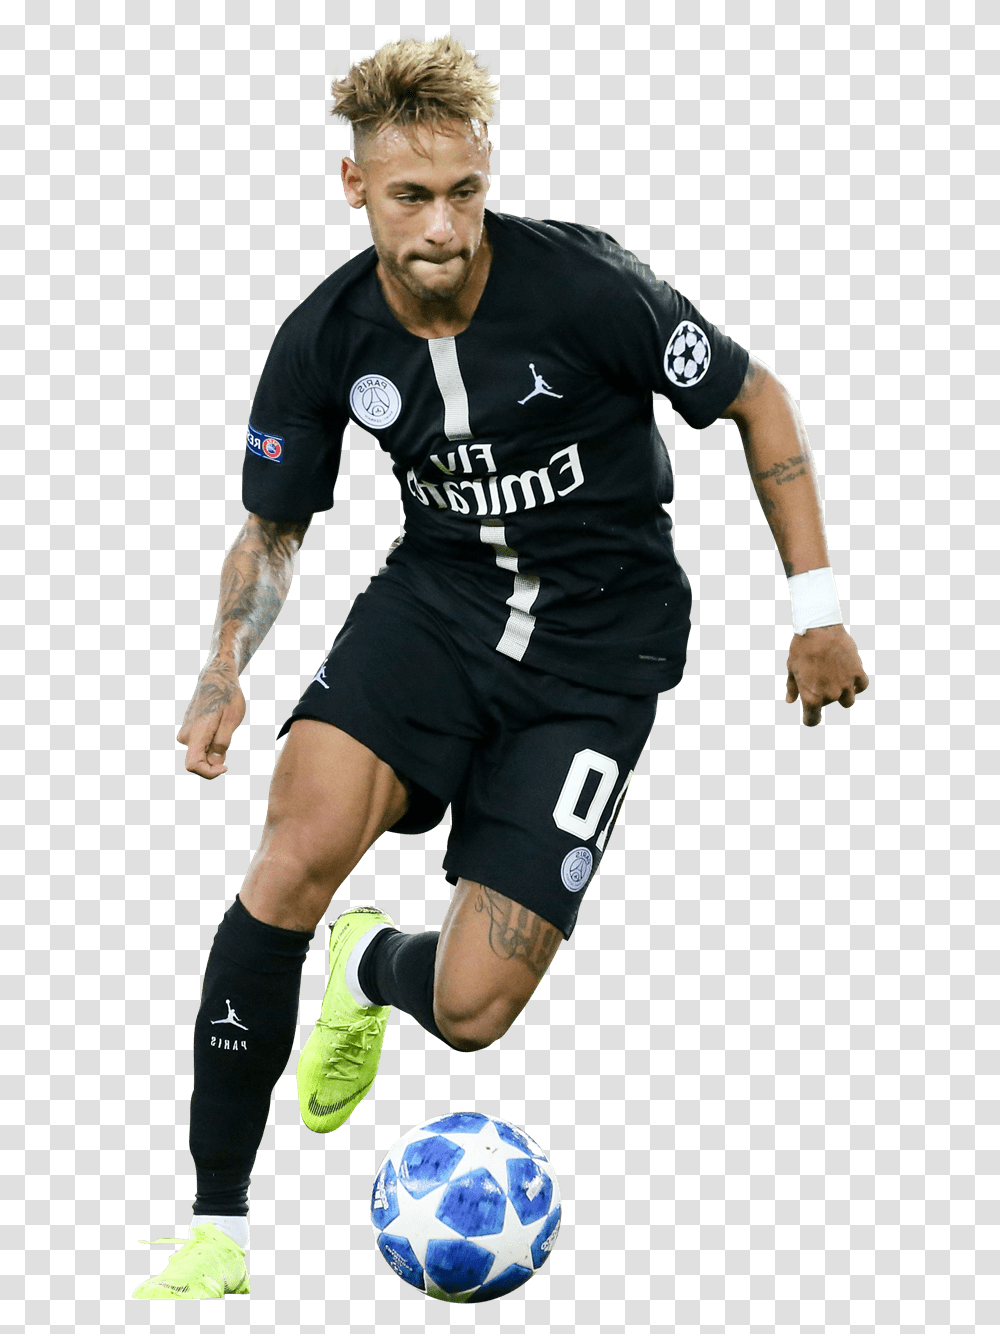 Download Neymar Background Image For Free Football Player, Soccer Ball, Team Sport, Person, People Transparent Png